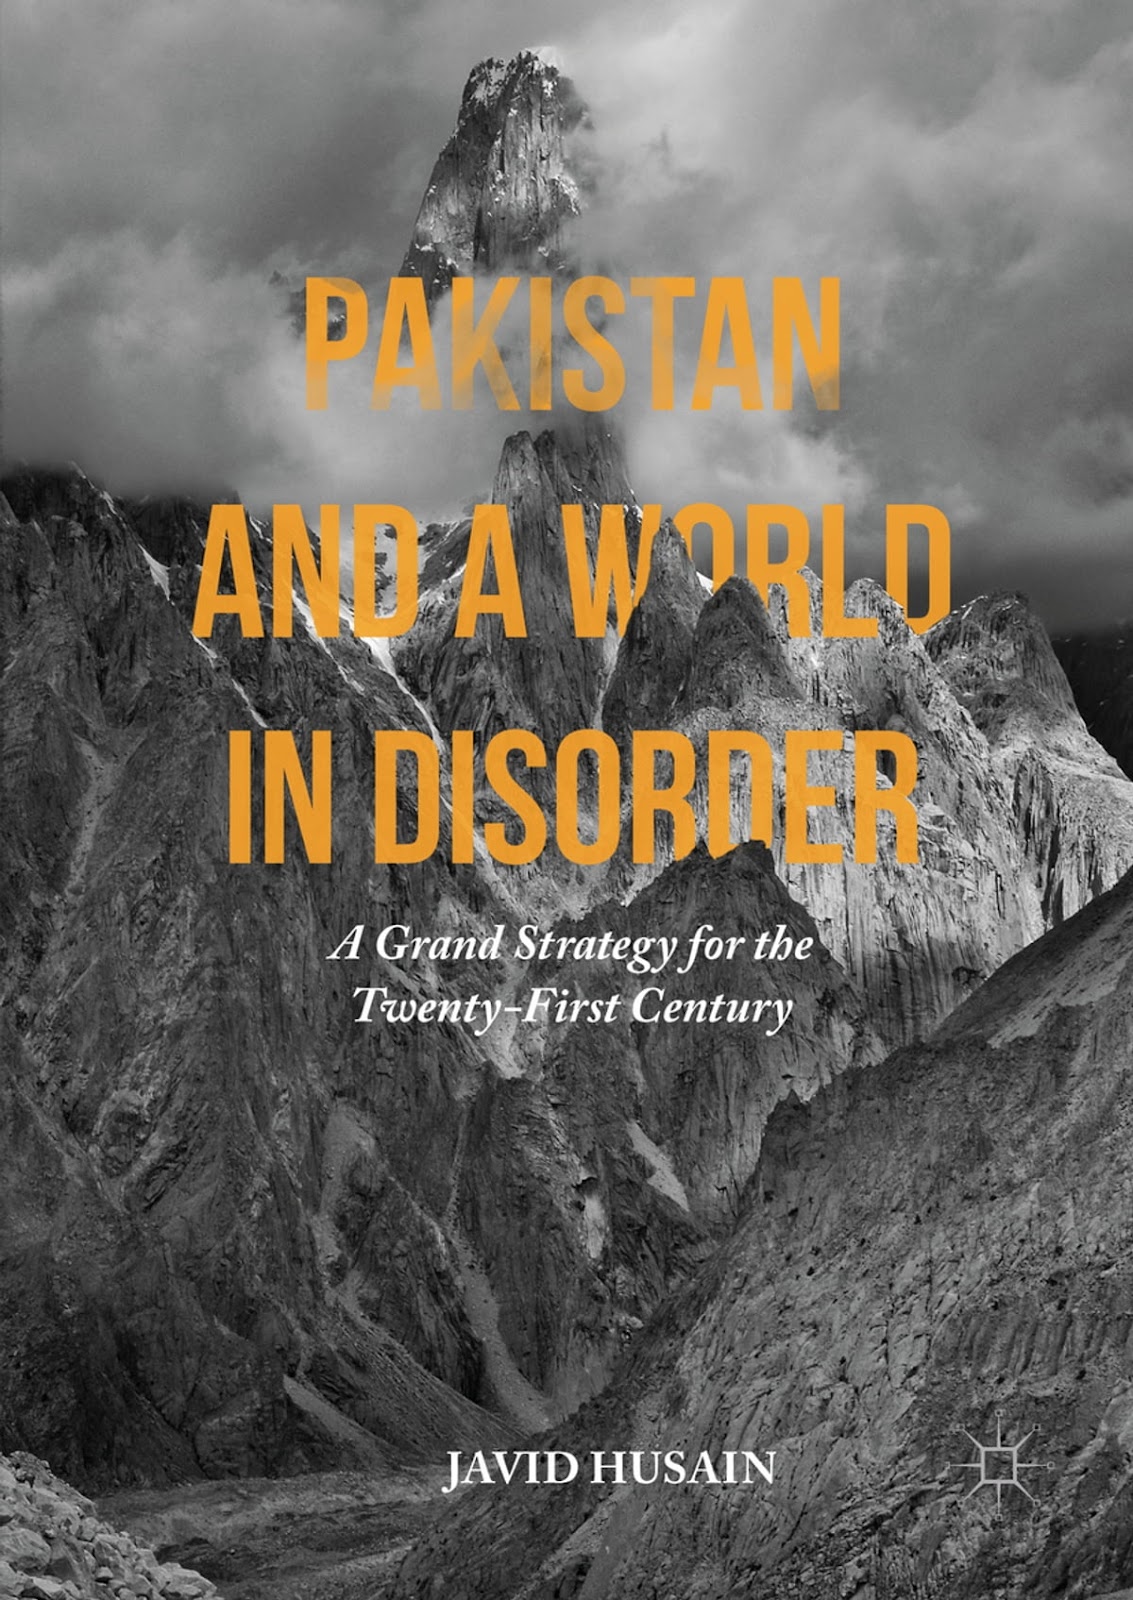 CG4-9 Pakistan and a World in Disorder by Javid Hussain